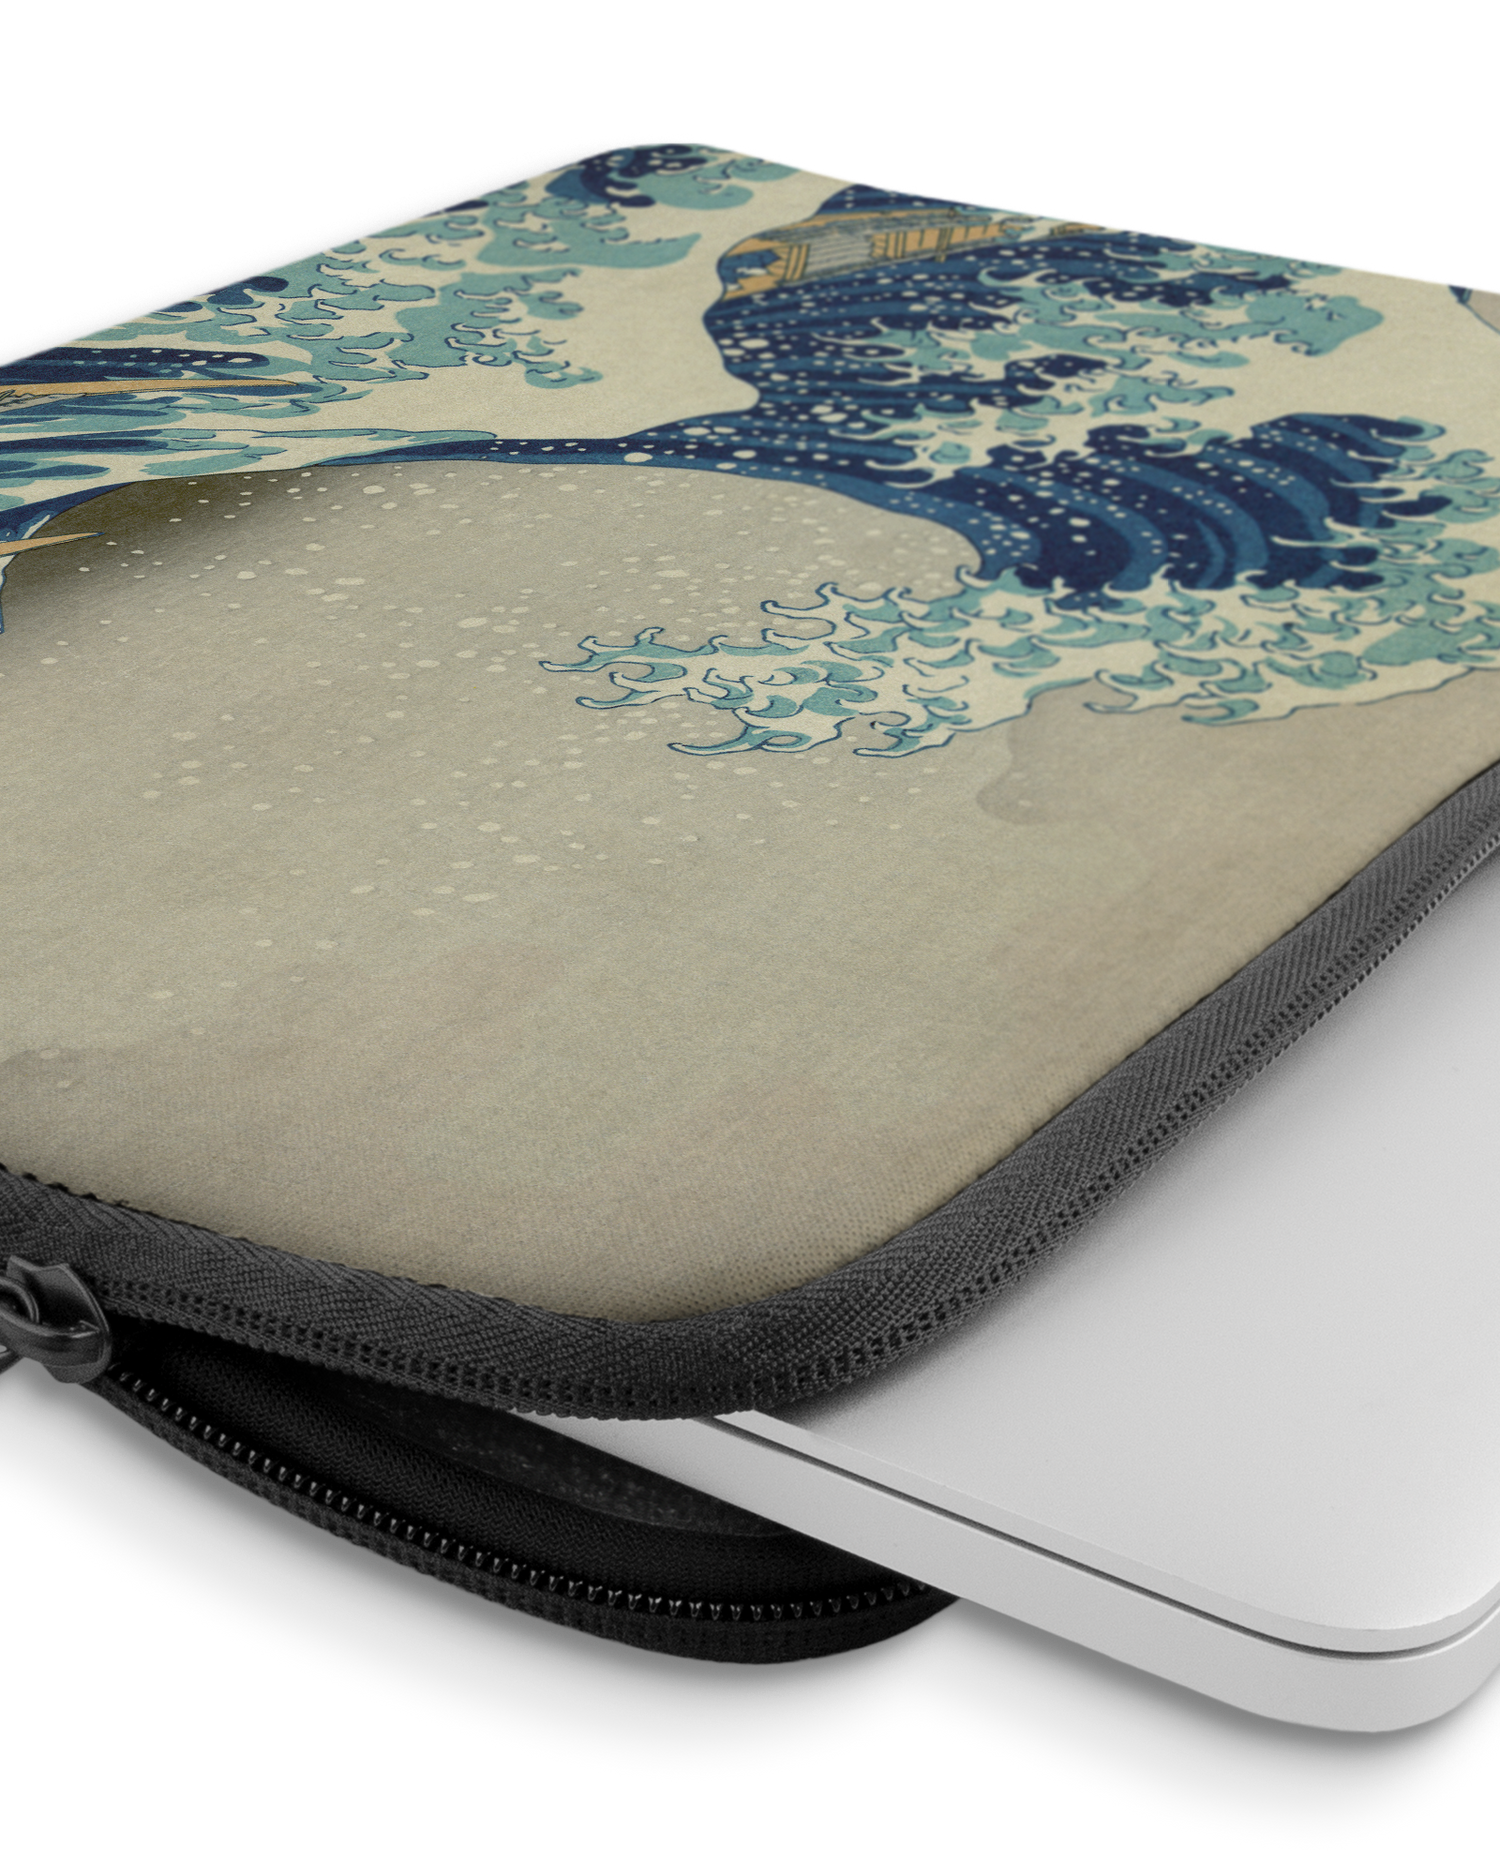 Great Wave Off Kanagawa By Hokusai Laptop Case 13-14 inch with device inside